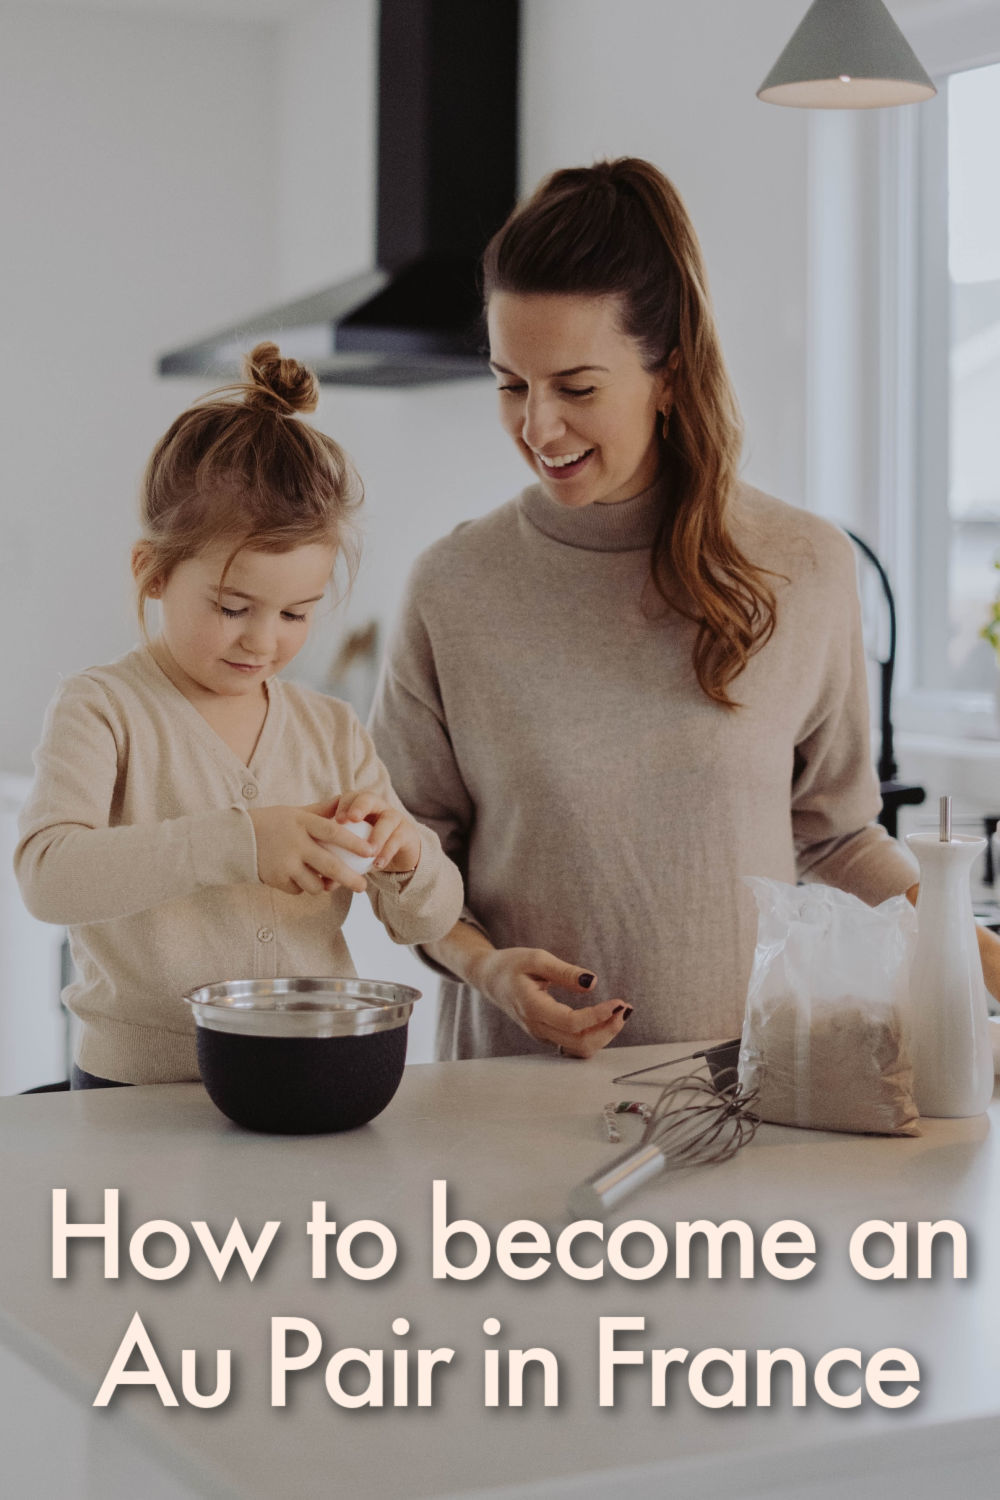 Au pairing in France is basically the most immersive way to explore the country's culture, and bonus, you get paid to do it! Living with a French family and looking after their children while they work means that you don’t have to worry about accommodation and food costs.
All you need to know about becoming an au pair in France is in this guide. Requirements, jobs, how to apply, and a trustworthy agency.